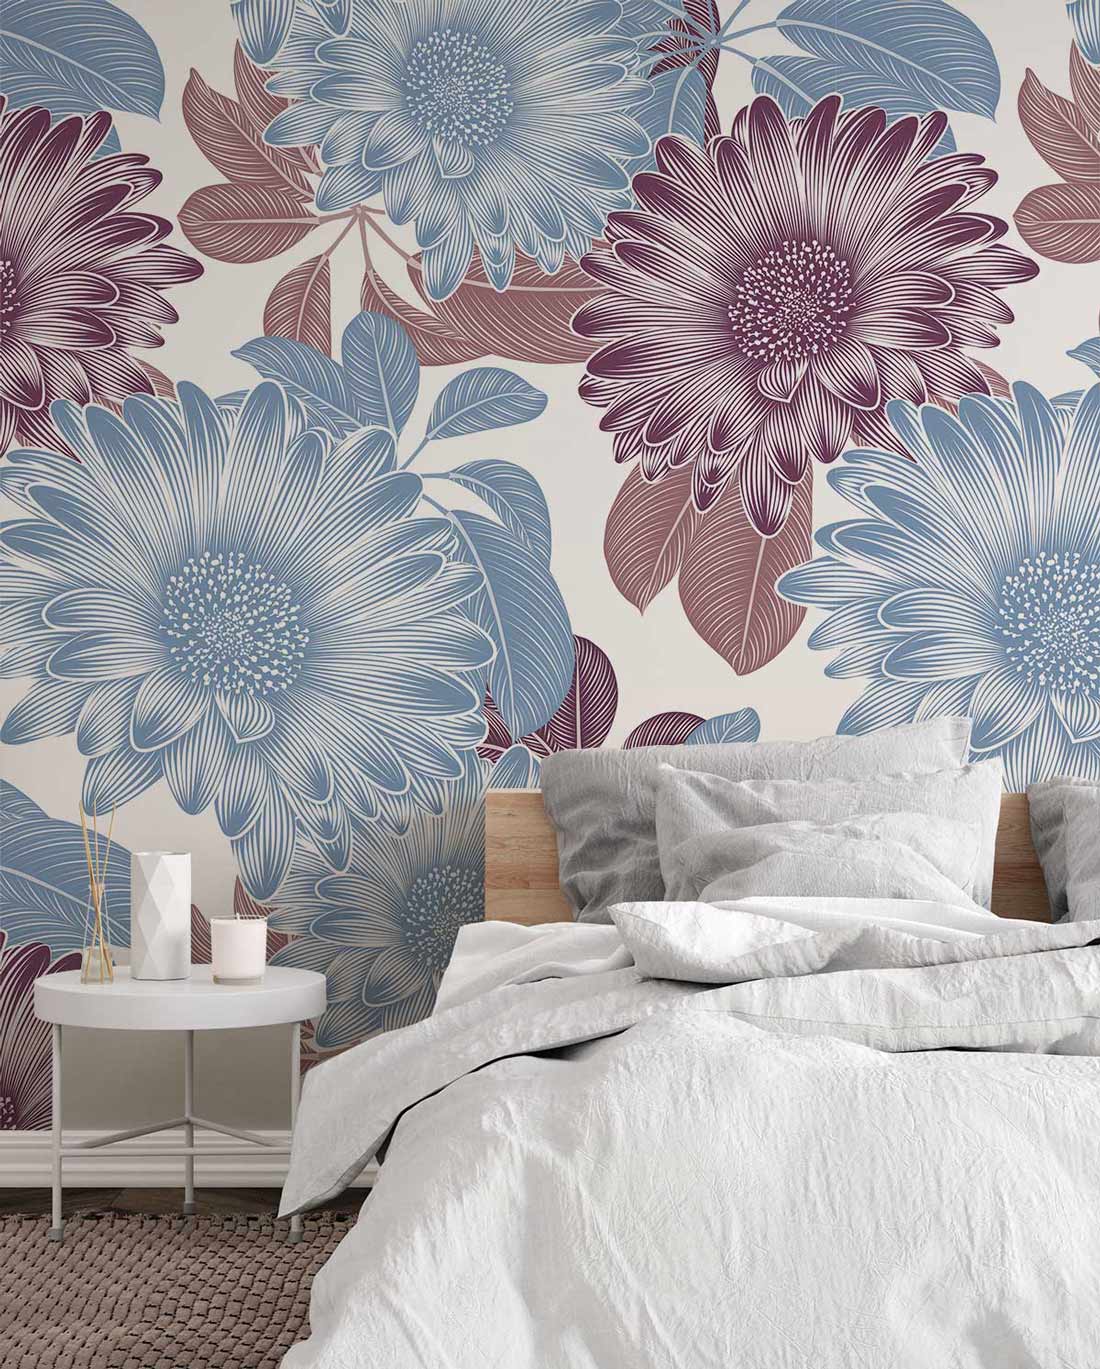 Patterned backdrop with a flower and color vinatge combination that is unique to it